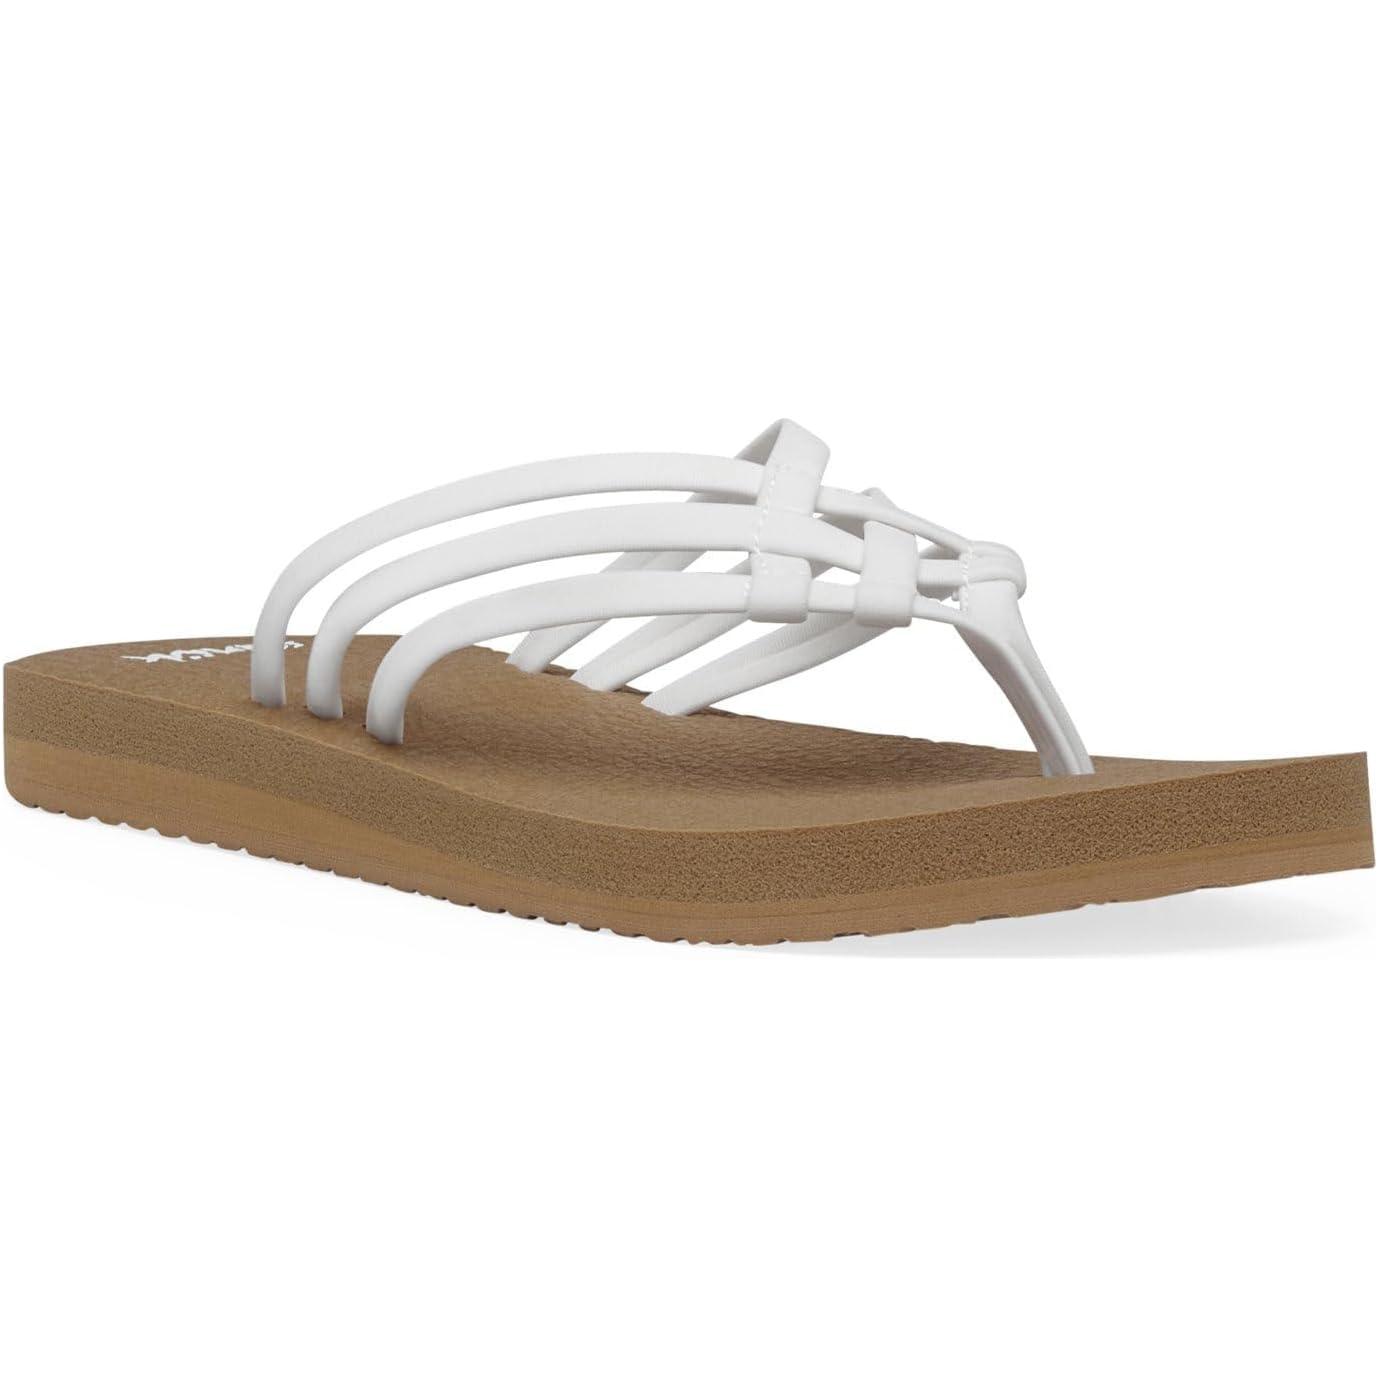 Sanuk Donna Hemp Women's Shoe-Natural-7 - Used - Acceptable - Ourland  Outdoor